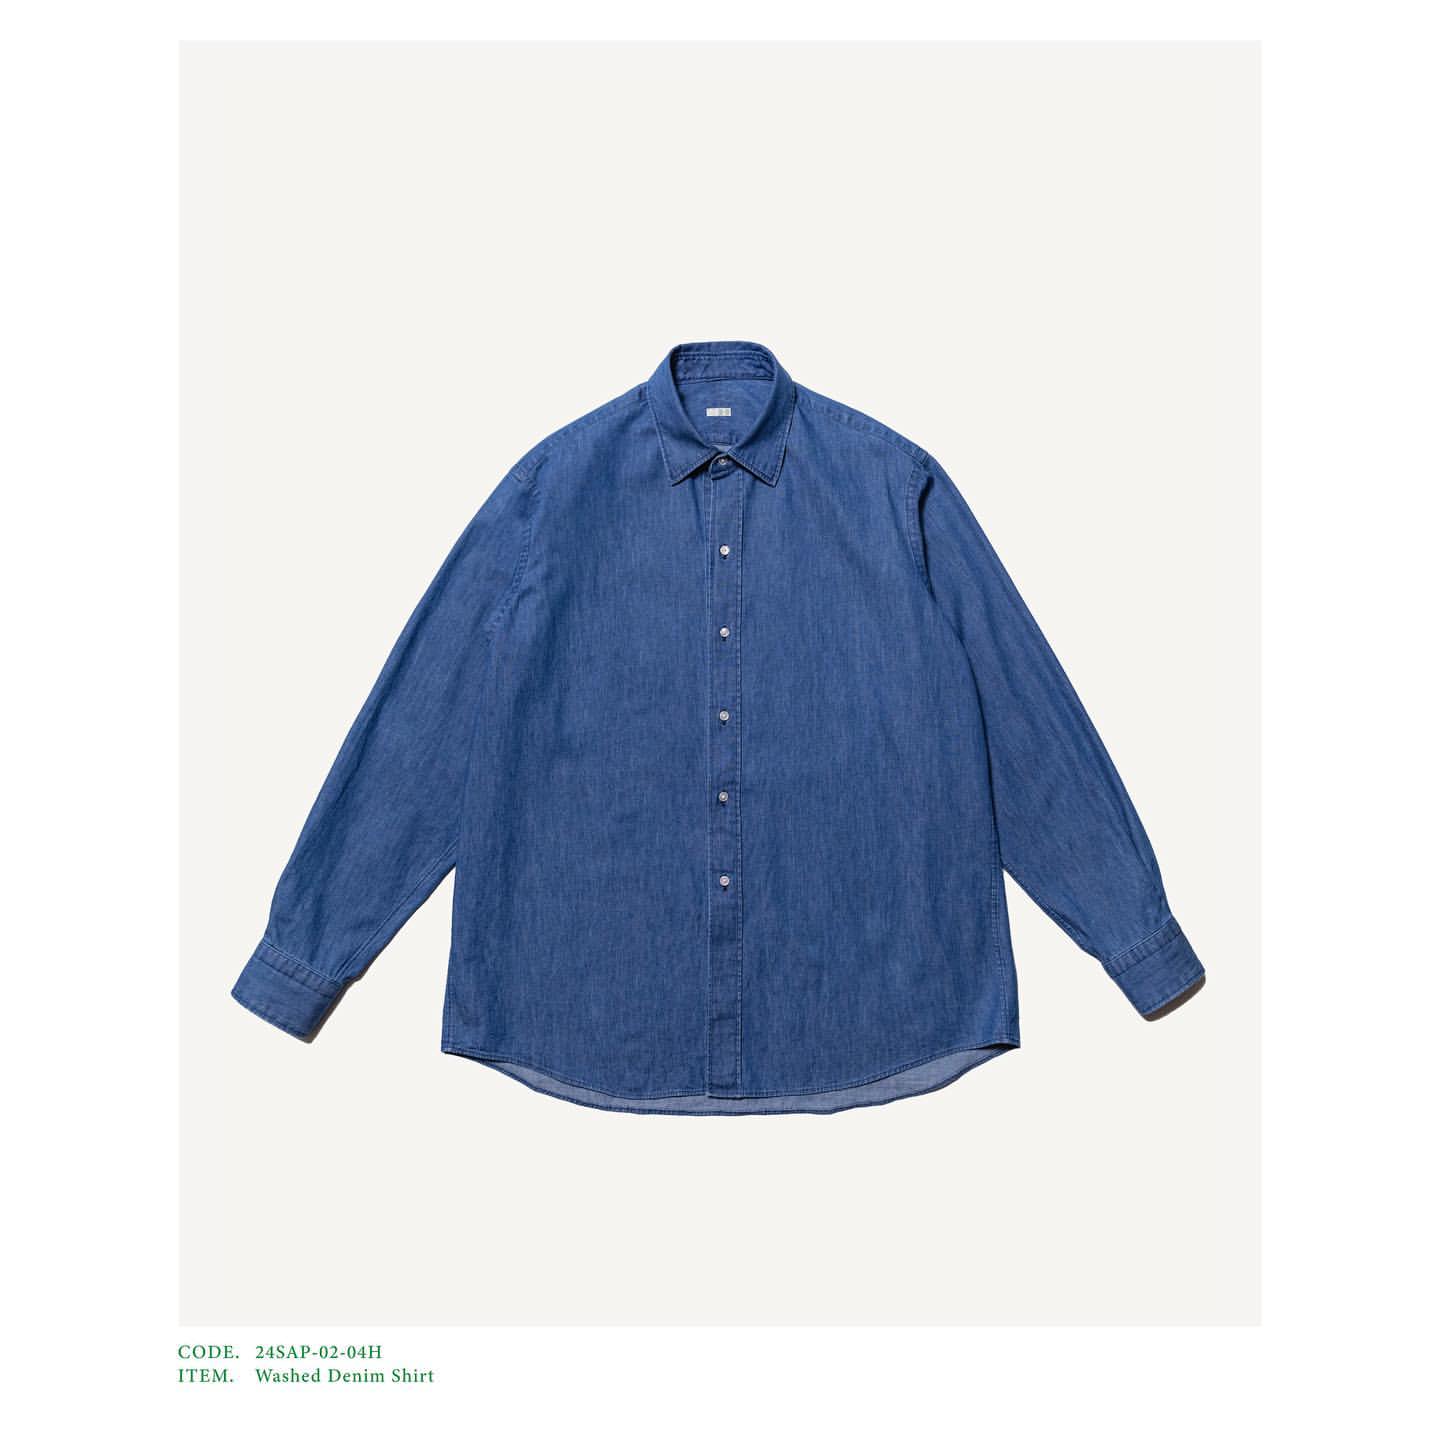 A.PRESSE Washed Denim Shirt 24ss 1 - トップス